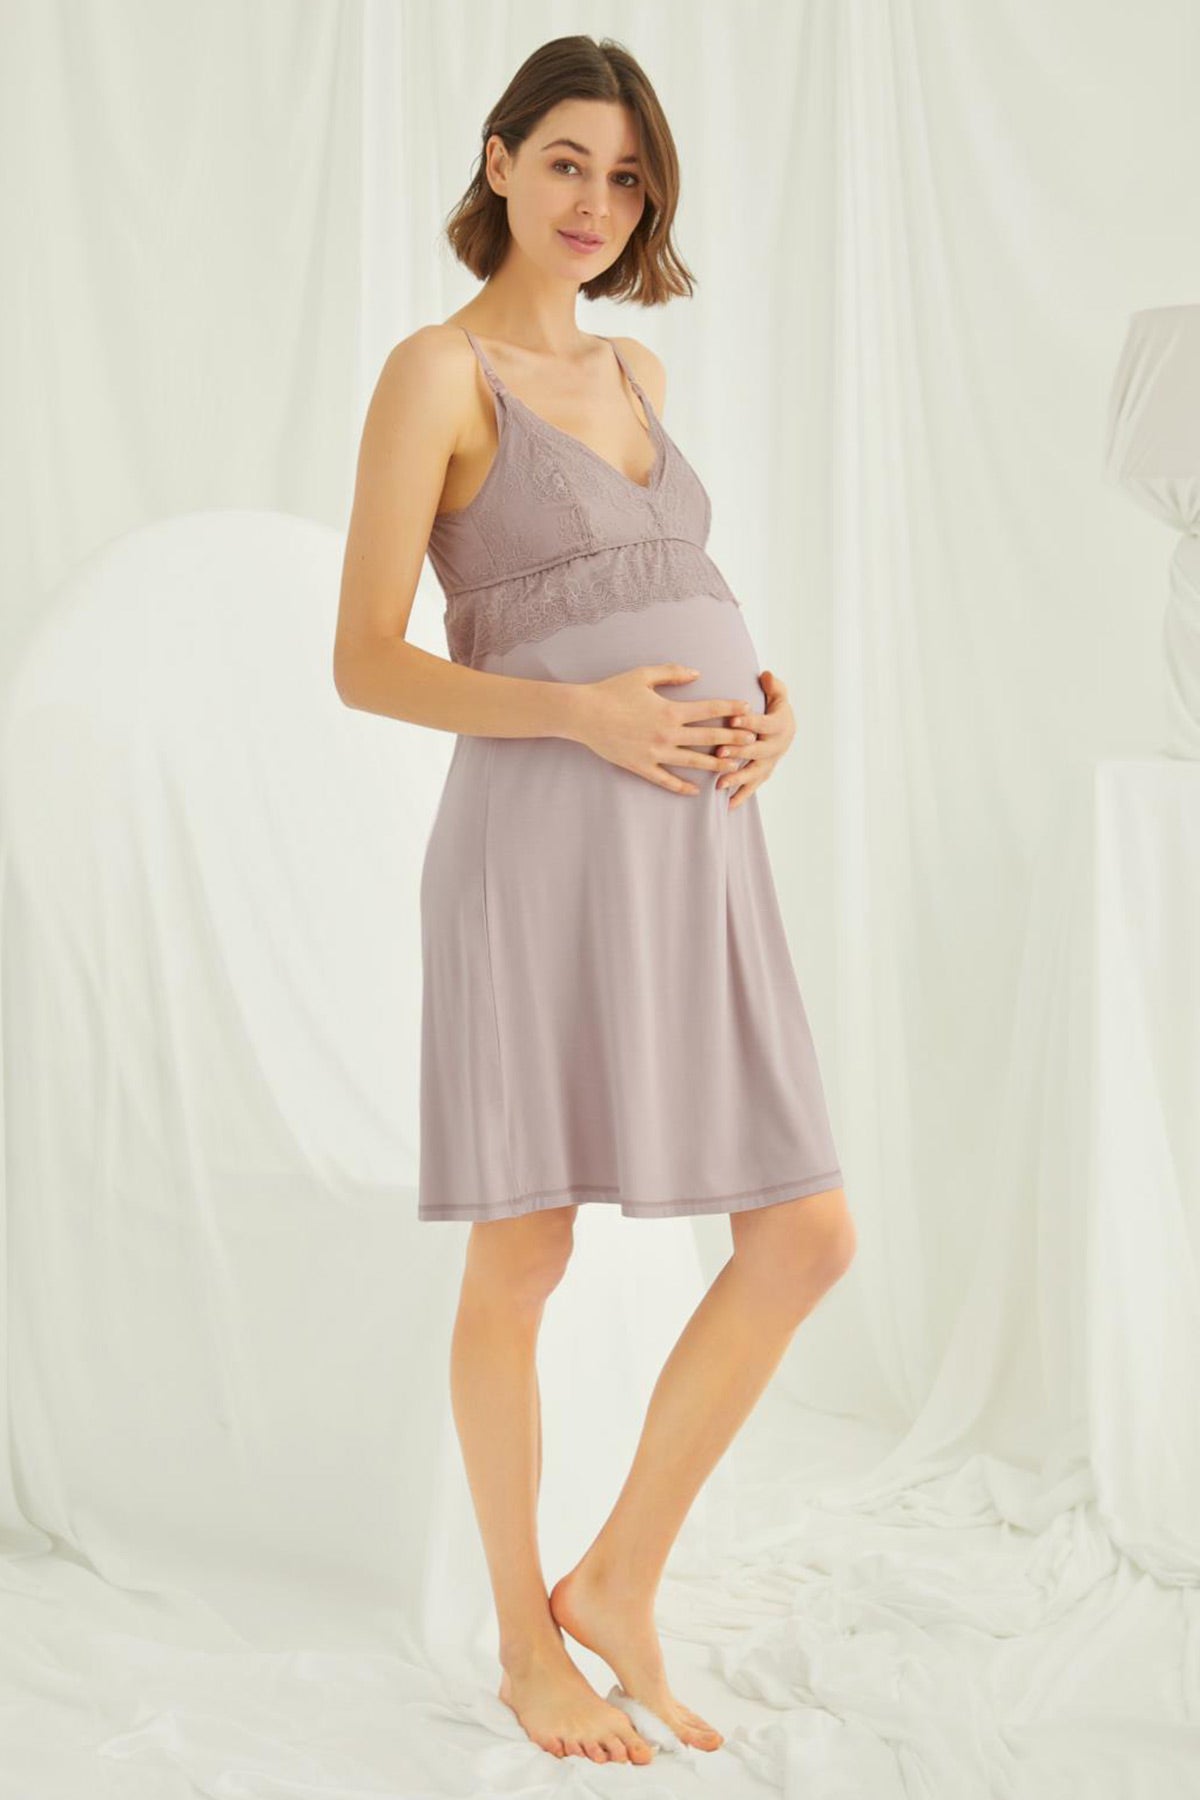 Shopymommy 431490 Lace Strappy 4 Pieces Maternity & Nursing Set Coffee